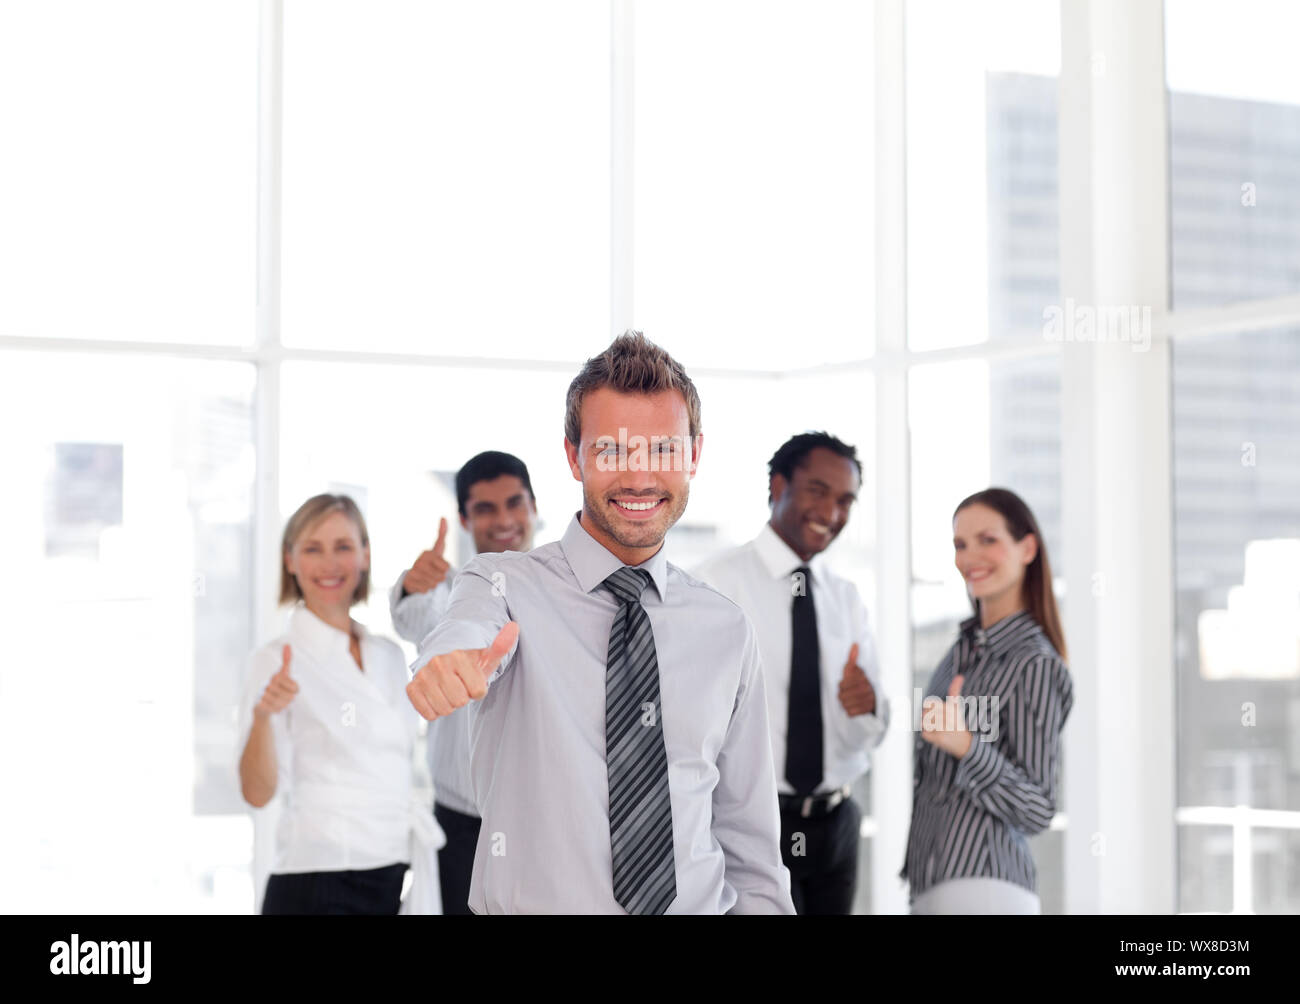 Sucessful business team Stock Photo